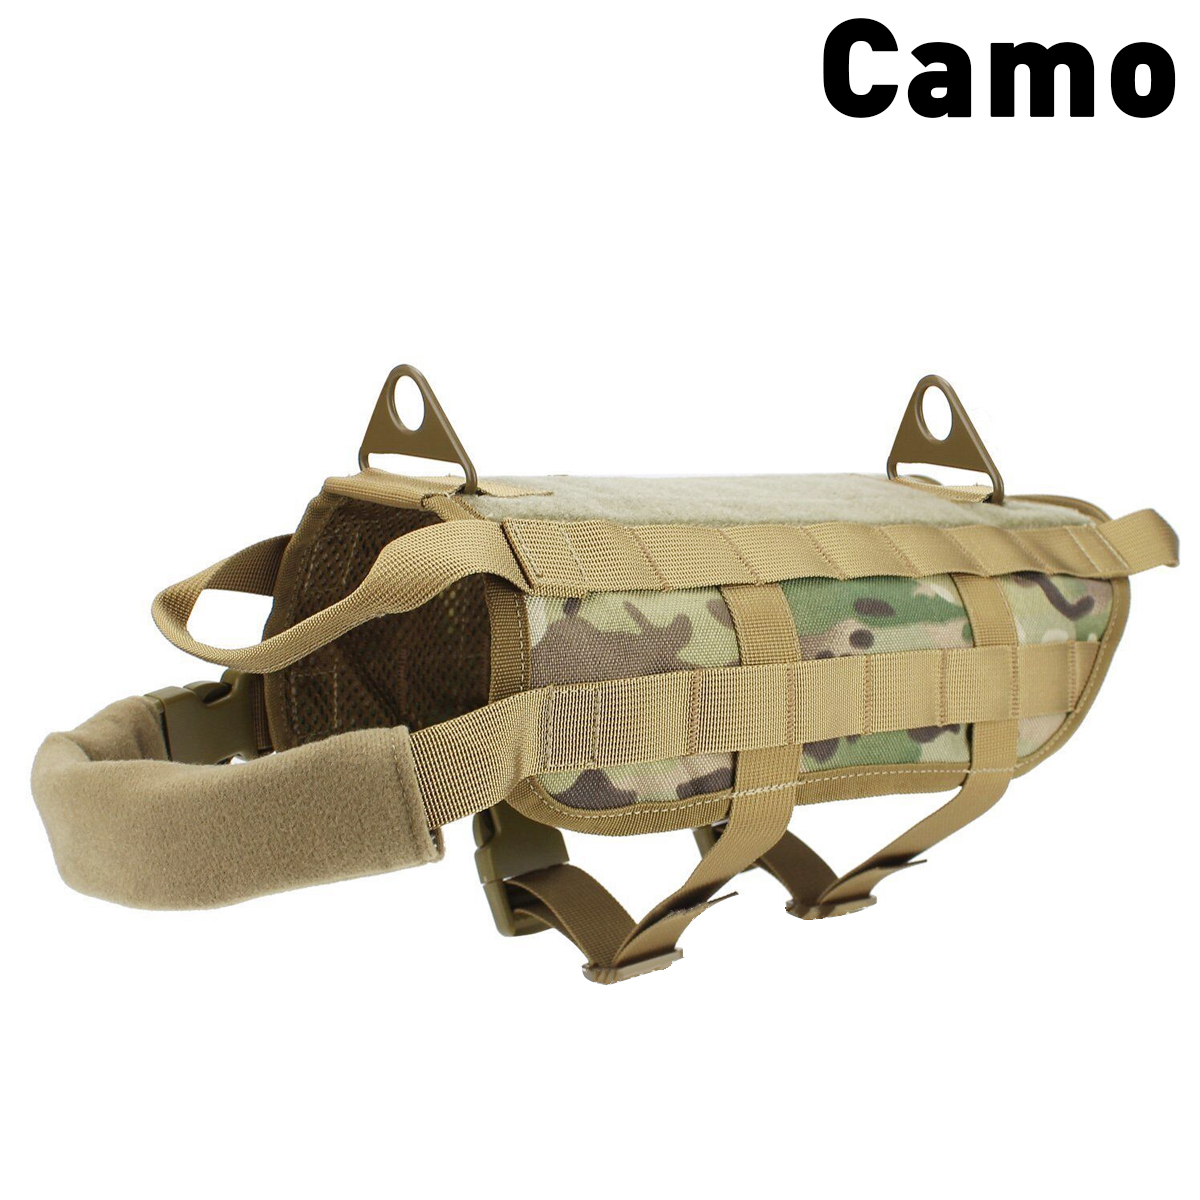 Dog-Vest-Training-Tactical-Army-Dog-Tape-Military-Dog-Clothes-Load-Bearing-Harness-Outdoor-Training--1817000-3